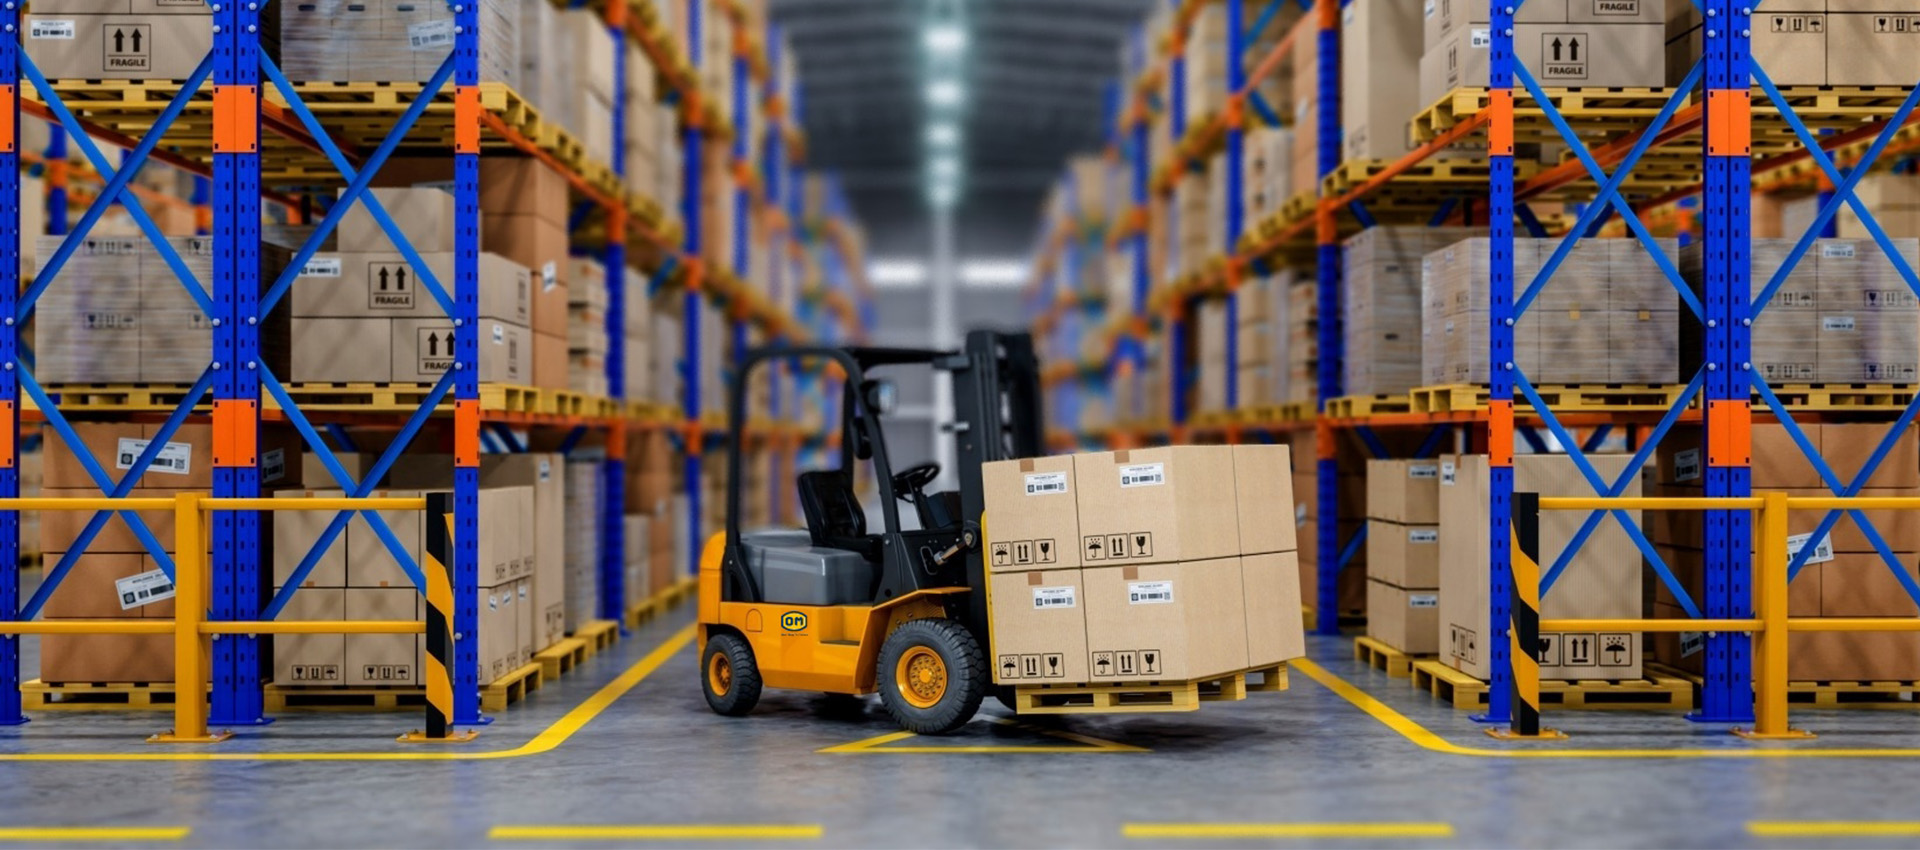 Forklifts solutions that will lift productivity level at your storage facility.